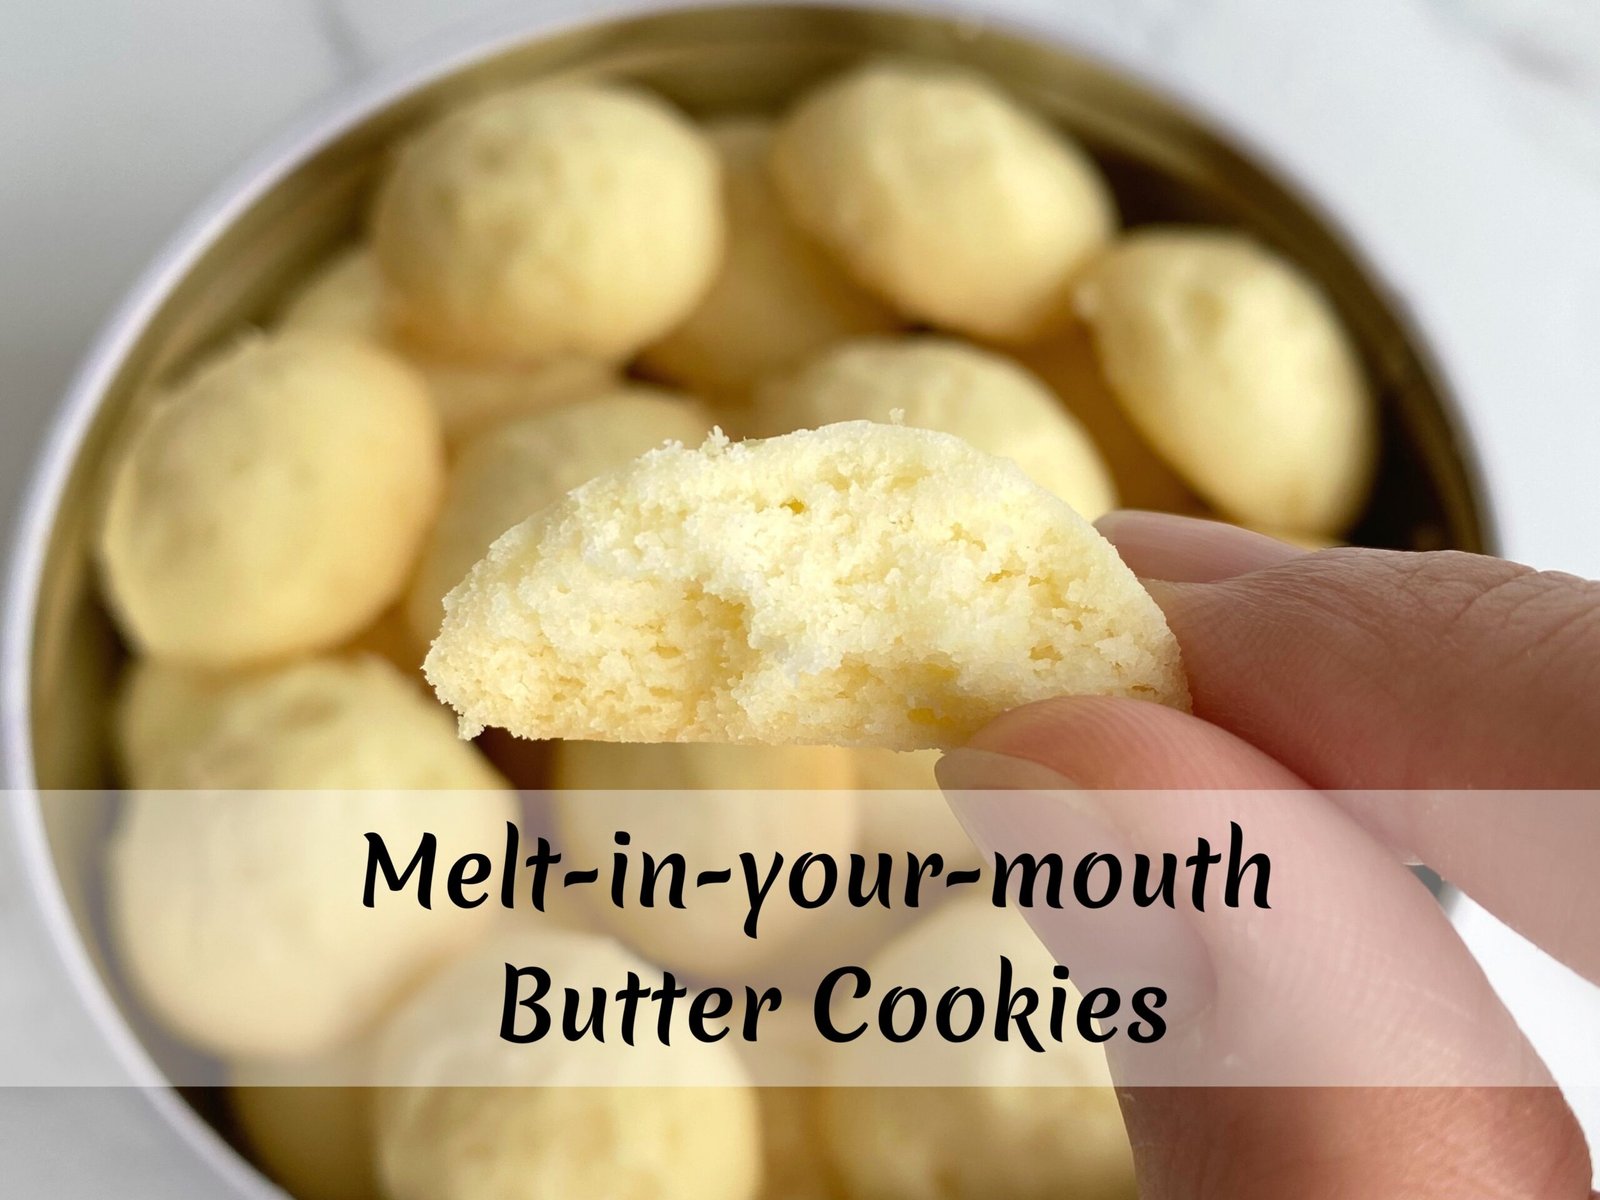 Melt-in-your-mouth butter cookies